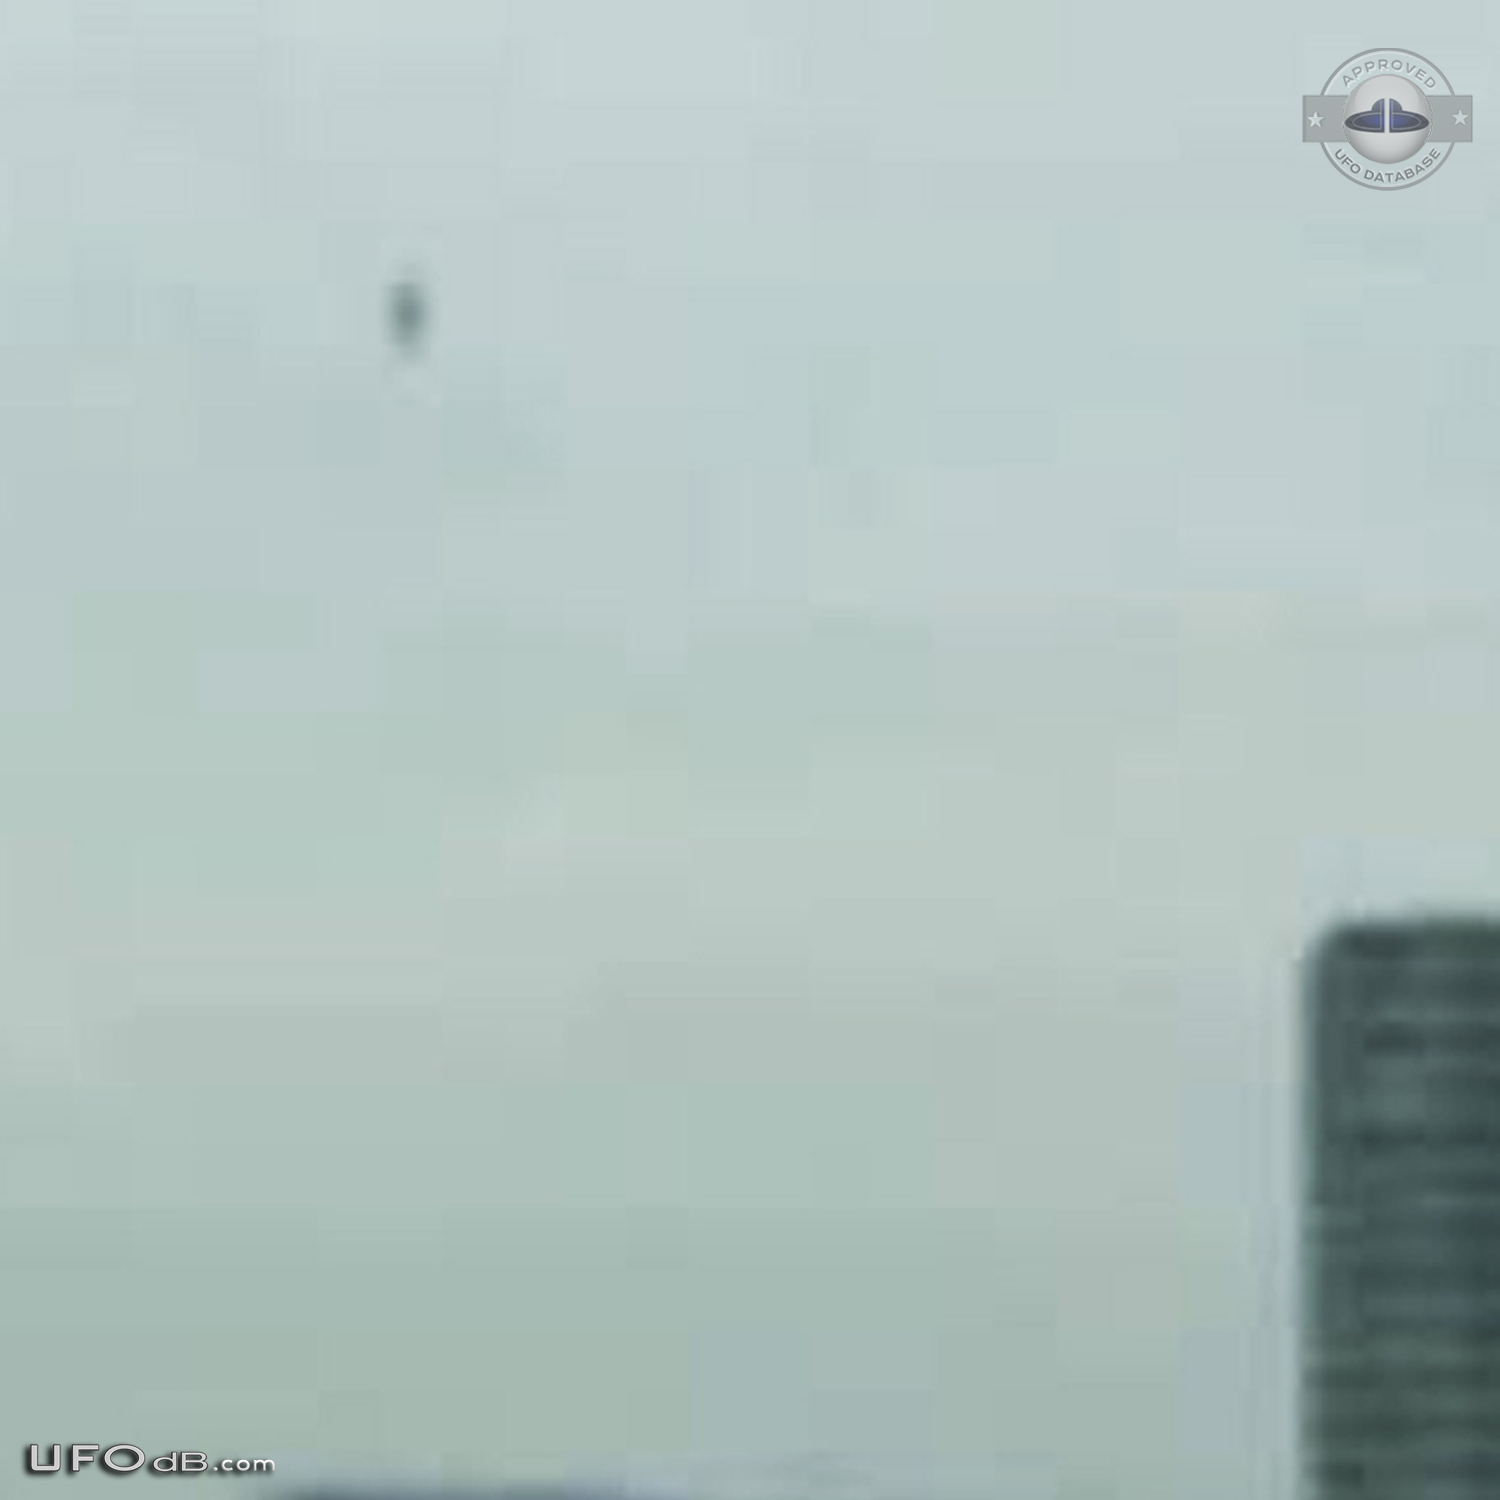 Probe ufo sighting caught on picture in Tokyo, Japan - January 2012 UFO Picture #410-4